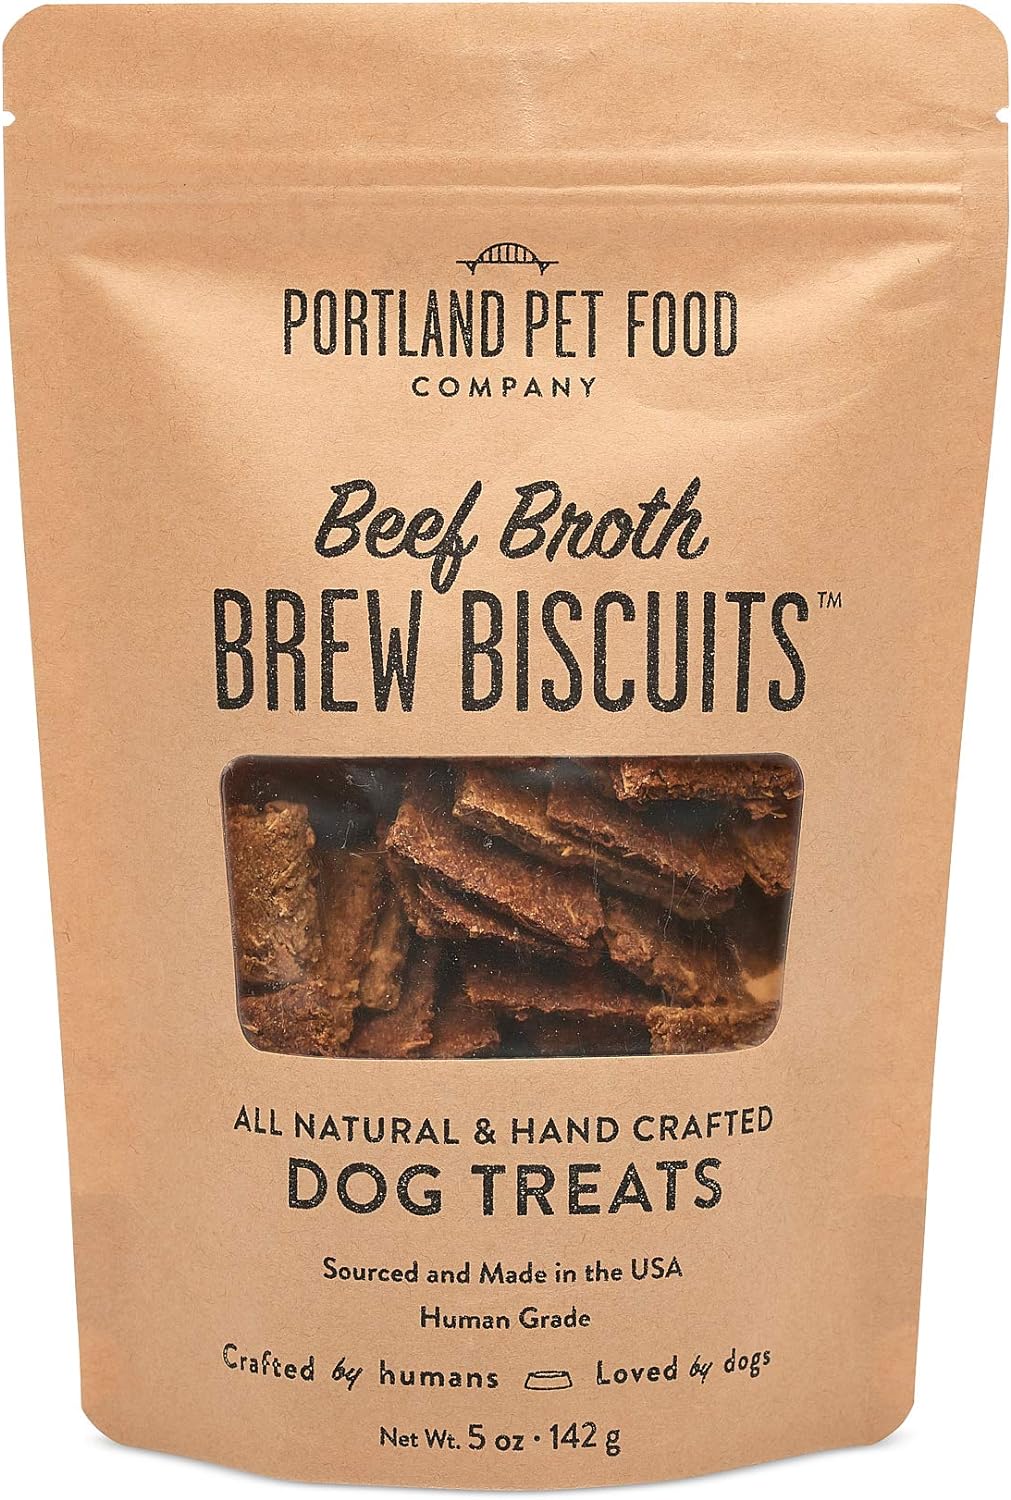 CRAFTED BY HUMANS LOVED BY DOGS Portland Pet Food Company Beef Broth Brew Biscuit Dog Treats (1 Pack, 5 oz Bag) – All Natural, Human-Grade, USA-Sourced and Made